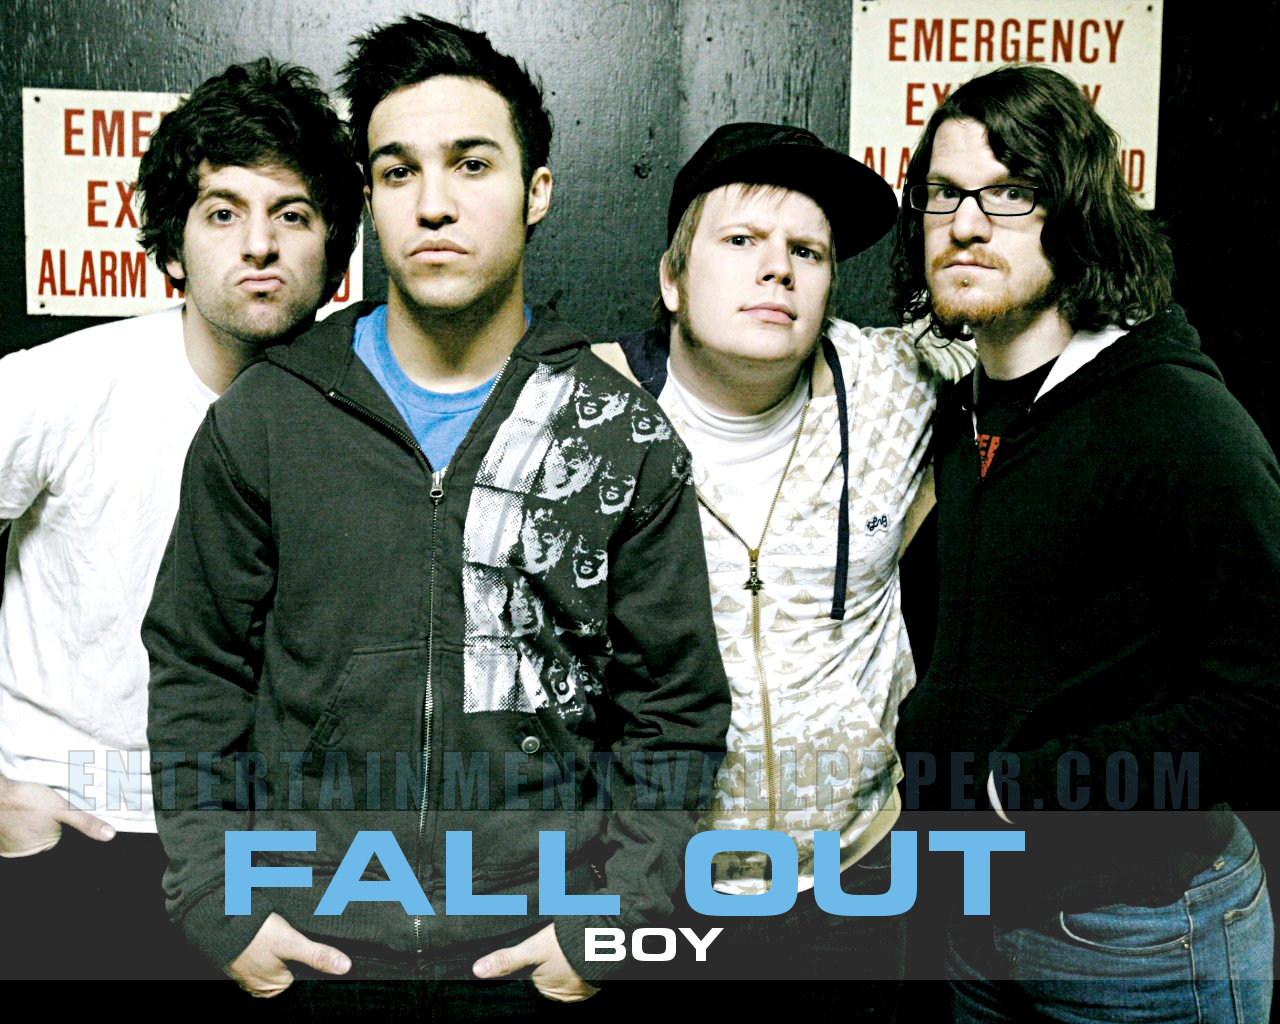 We fall out. Фал аут бой. Группа Fall out boy. Fall out boy Immortals обложка. Вокалист фал аут бой.